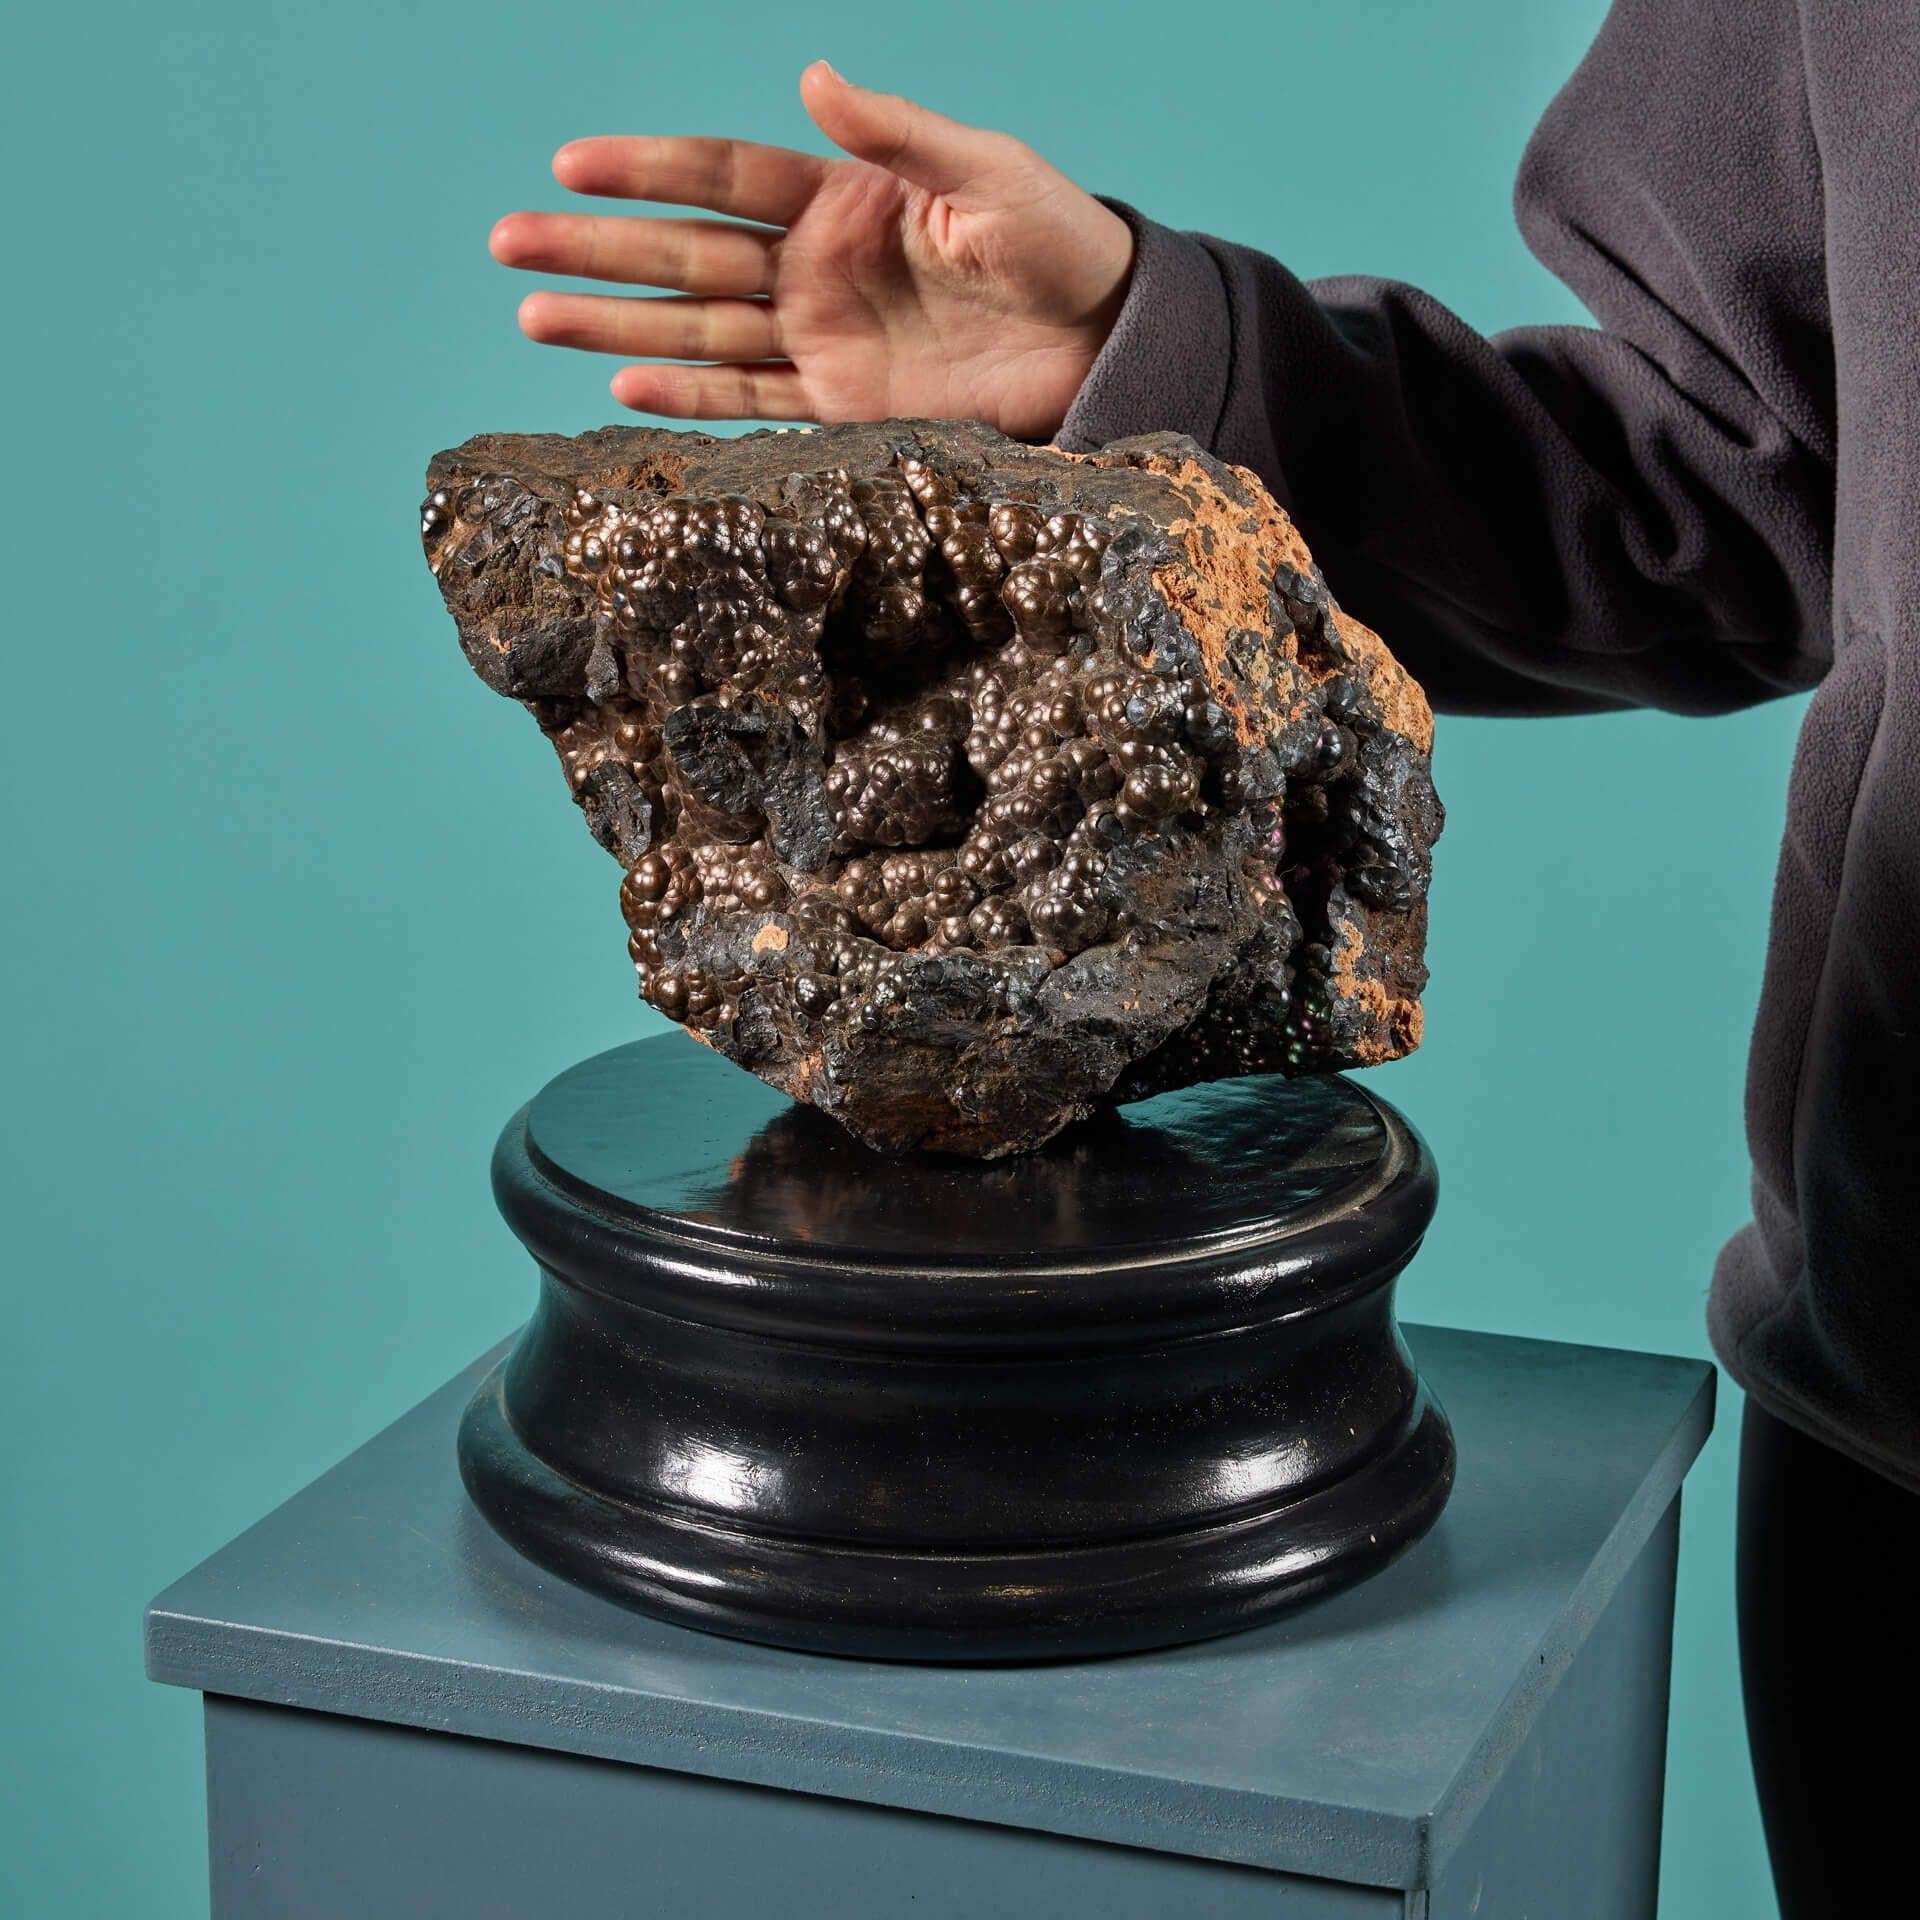 A very large, naturally occurring botryoidal hematite specimen, presented on one of our exclusive painted plaster display plinths.

Hematite is the most important iron ore; in fact, iron makes up 70% of its composition. Its appearance can vary